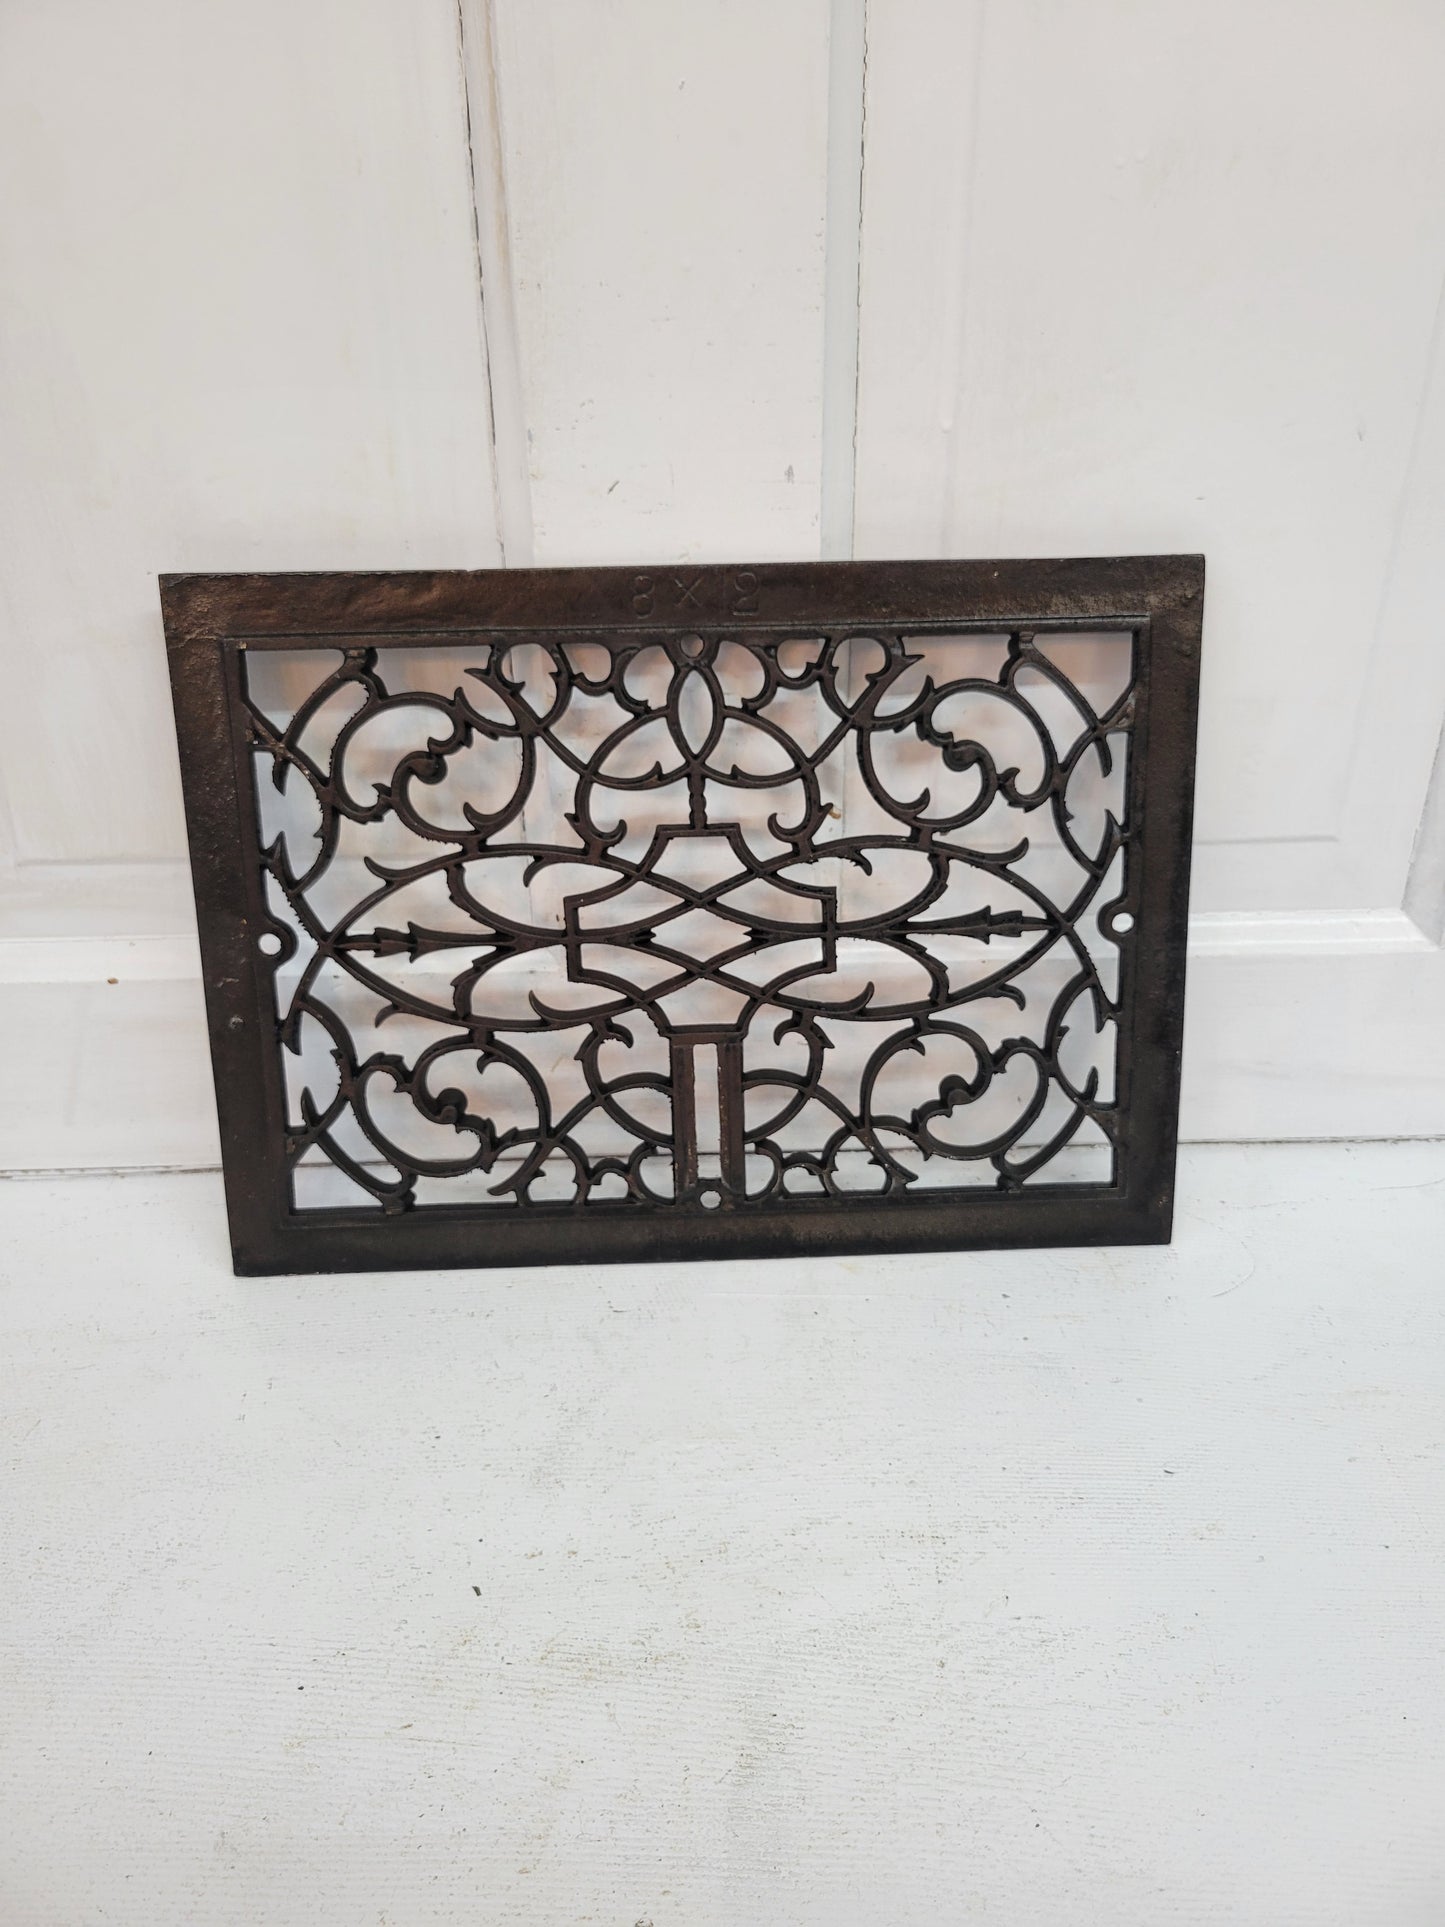 10 x 14 Scroll Design Antique Cast Iron Vent Cover, Floor or Wall Metal Register Grate #092703